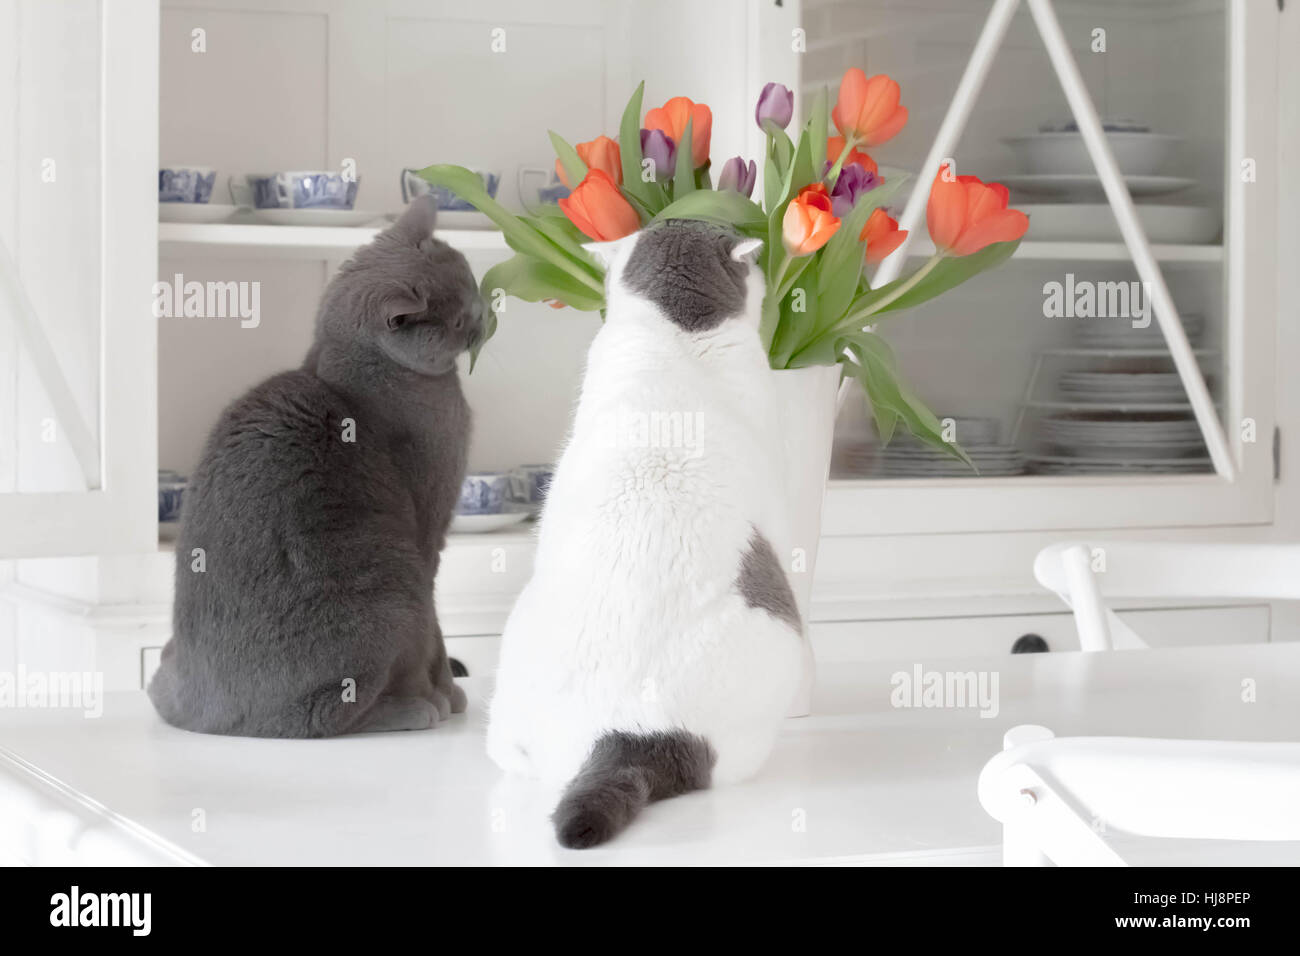 Two cats investigating a vase of tulips in kitchen Stock Photo